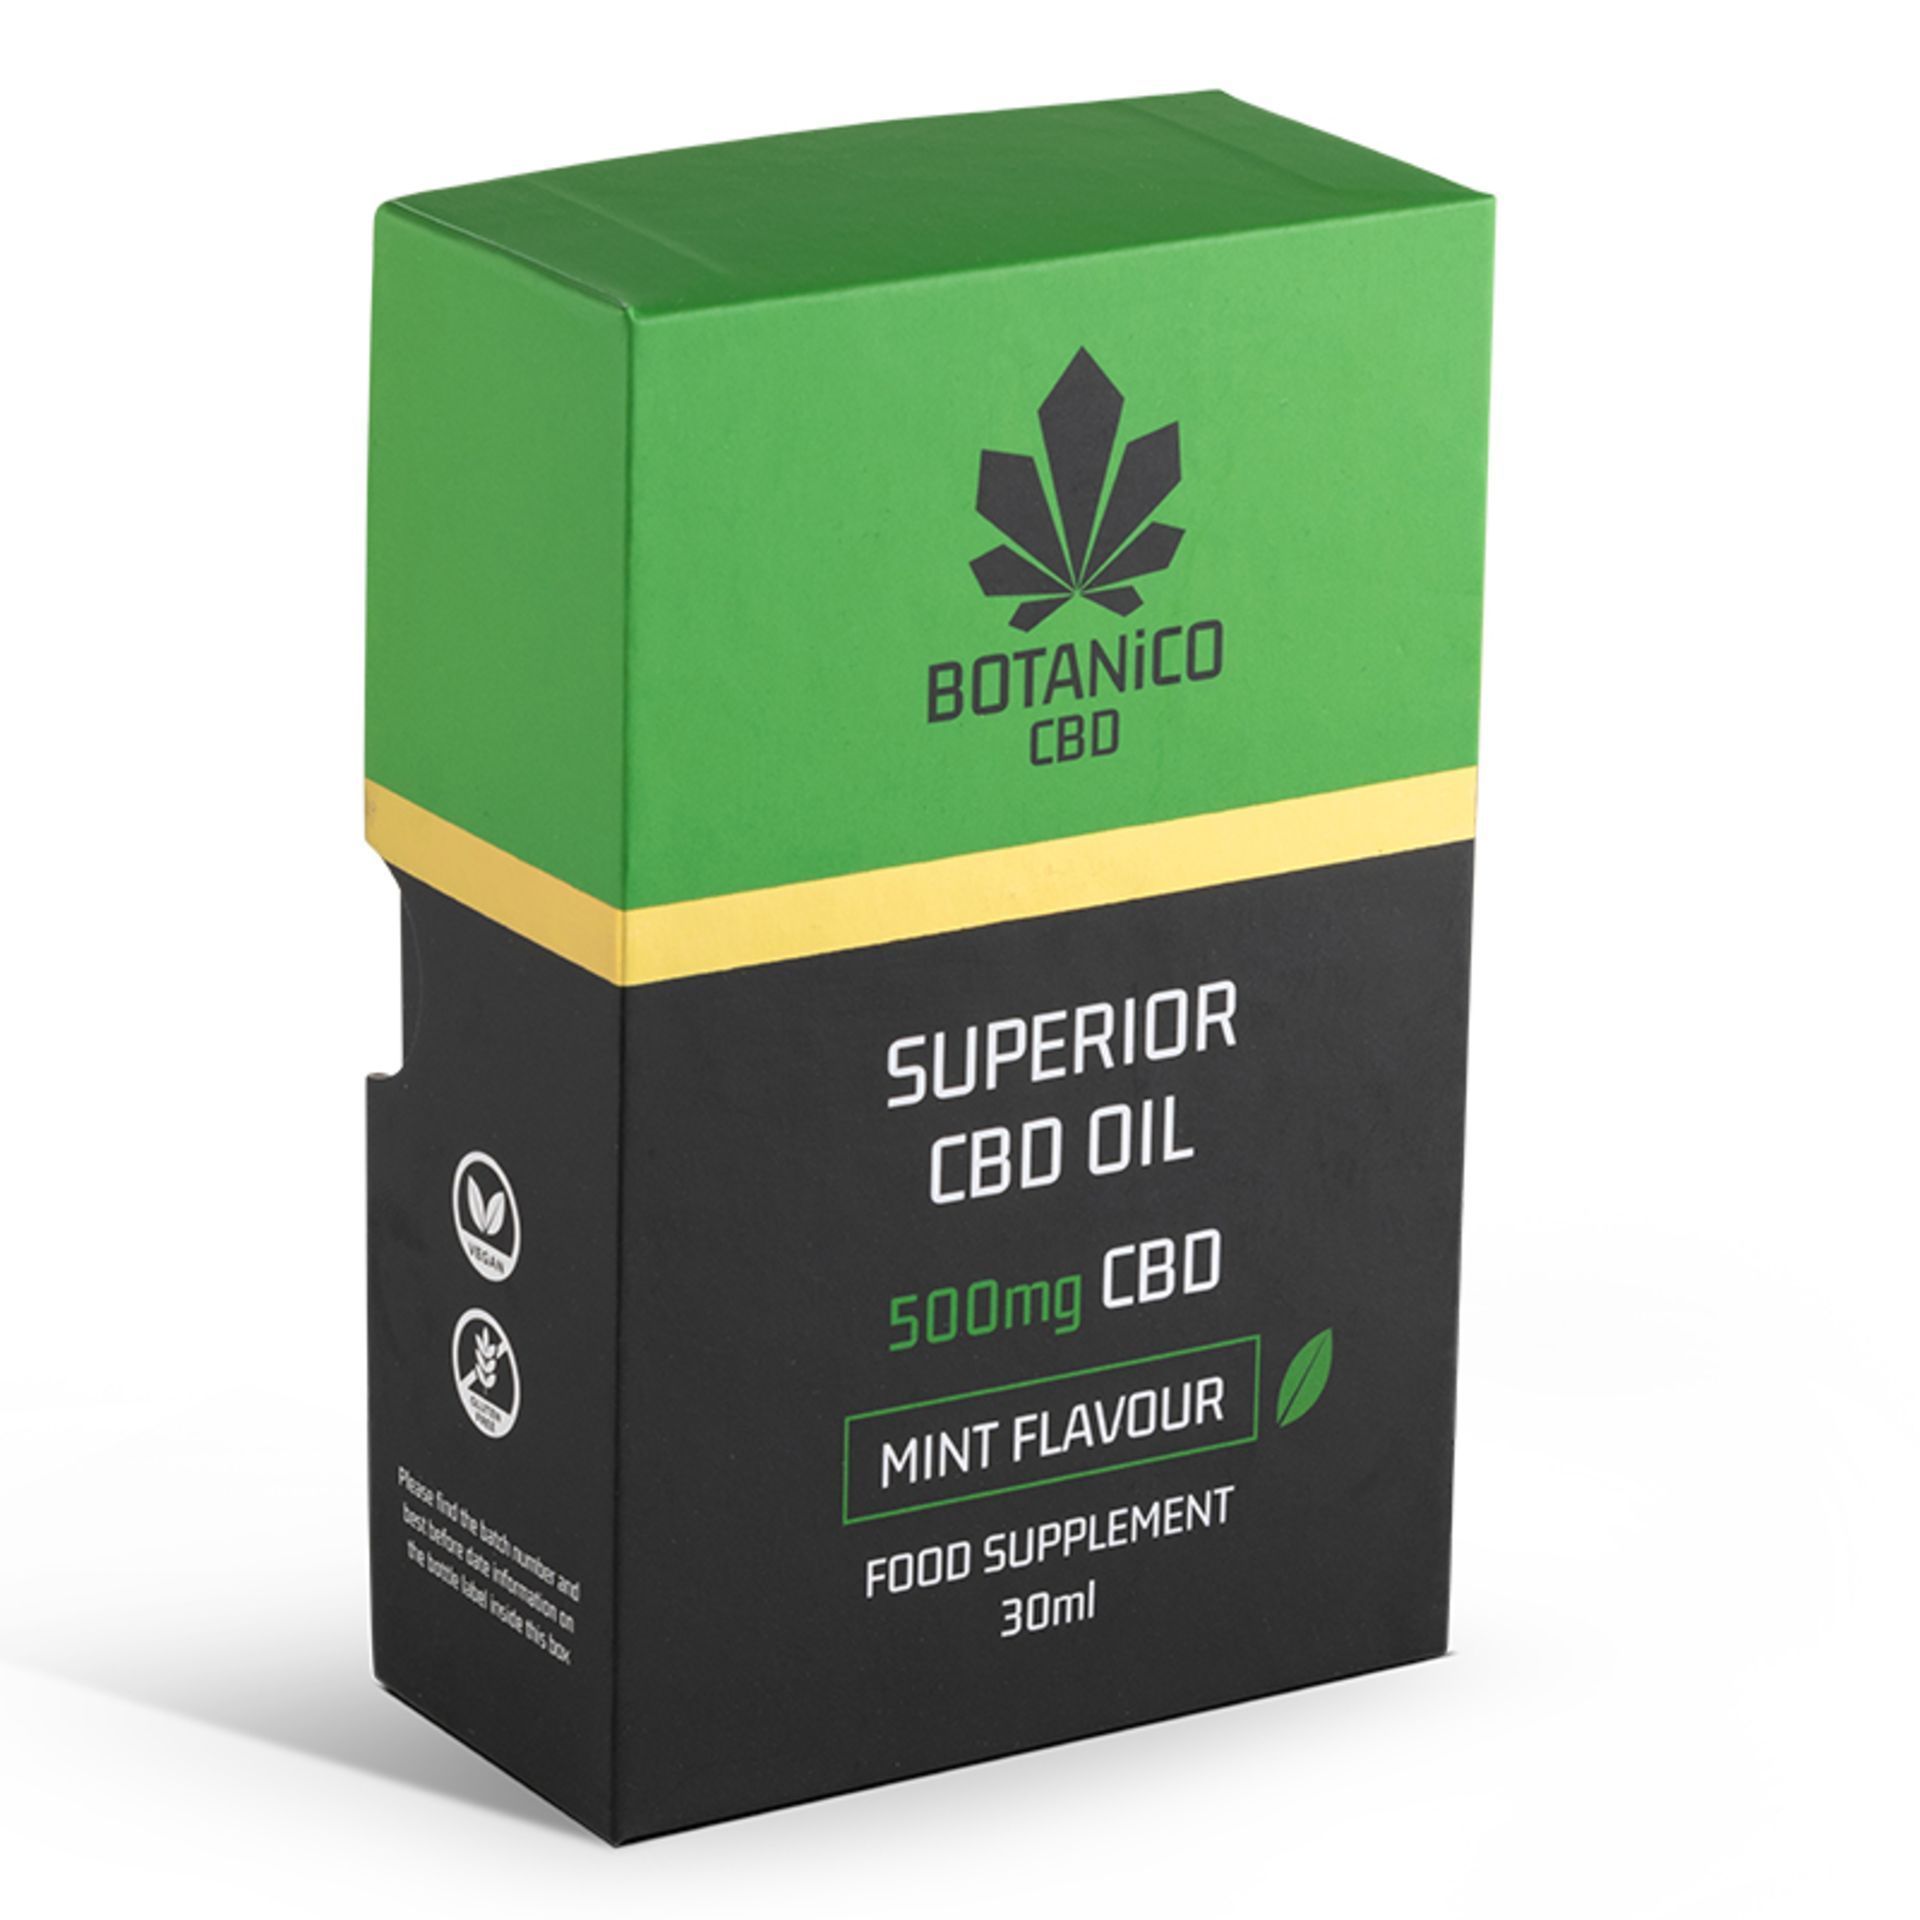 BTC - 5 BOTTLES OF 30ml MINT 500mg CBD OIL *PLUS VAT*  Our products are produced using the highest - Image 4 of 4